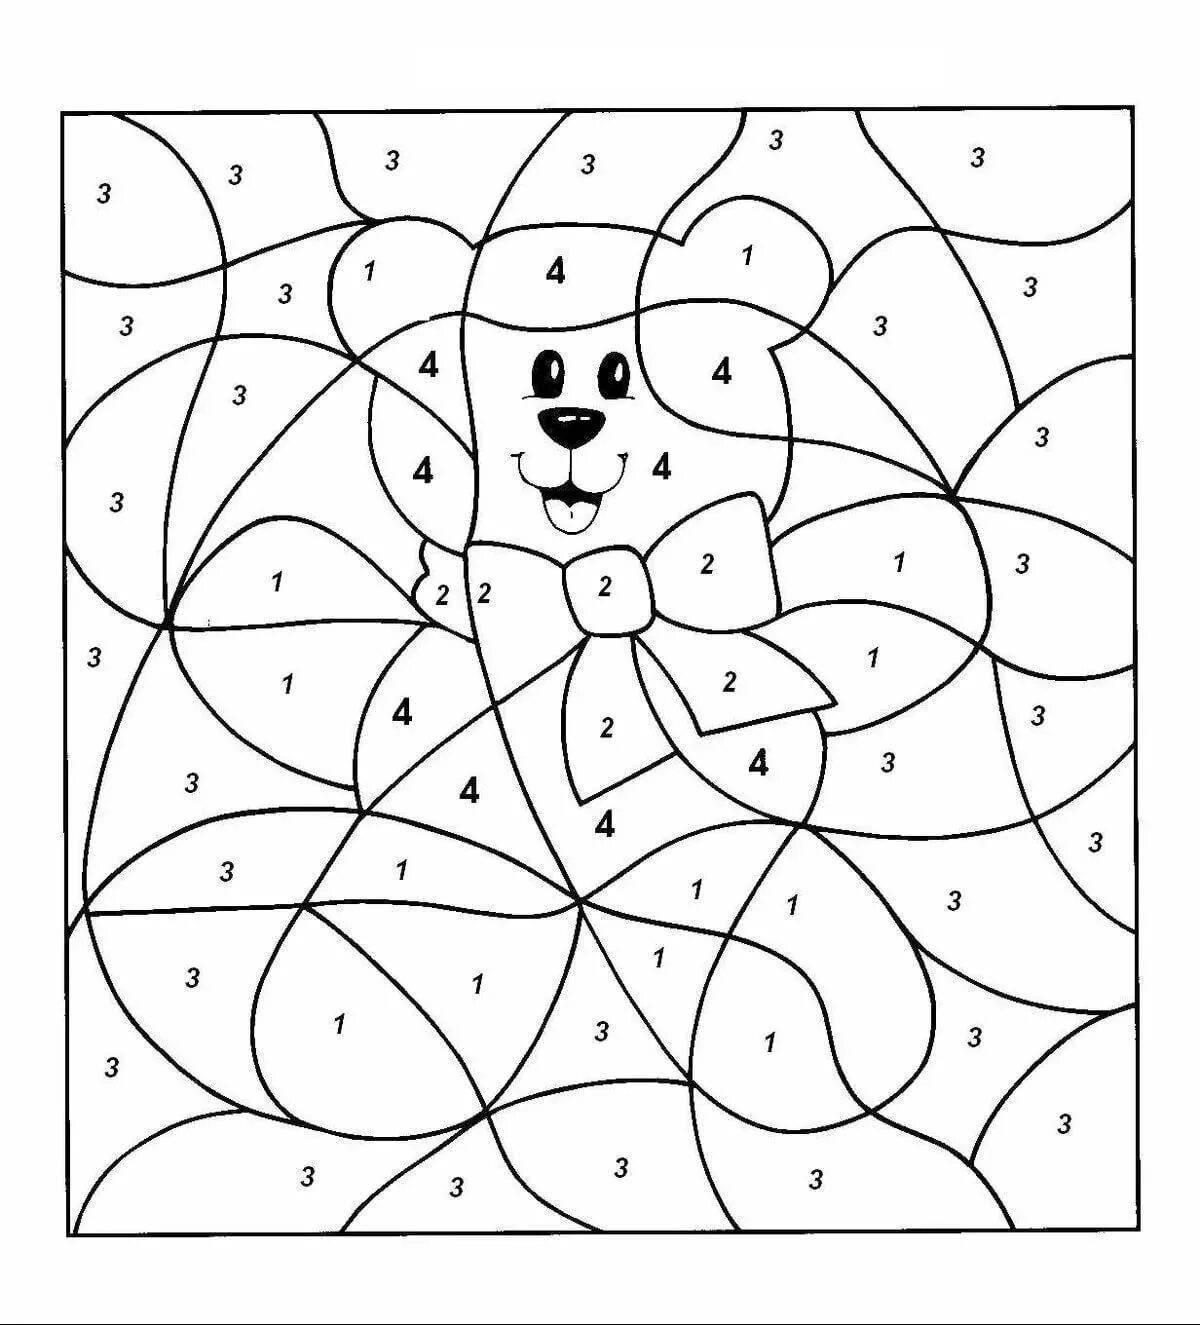 Easy-by-numbers relaxing coloring book